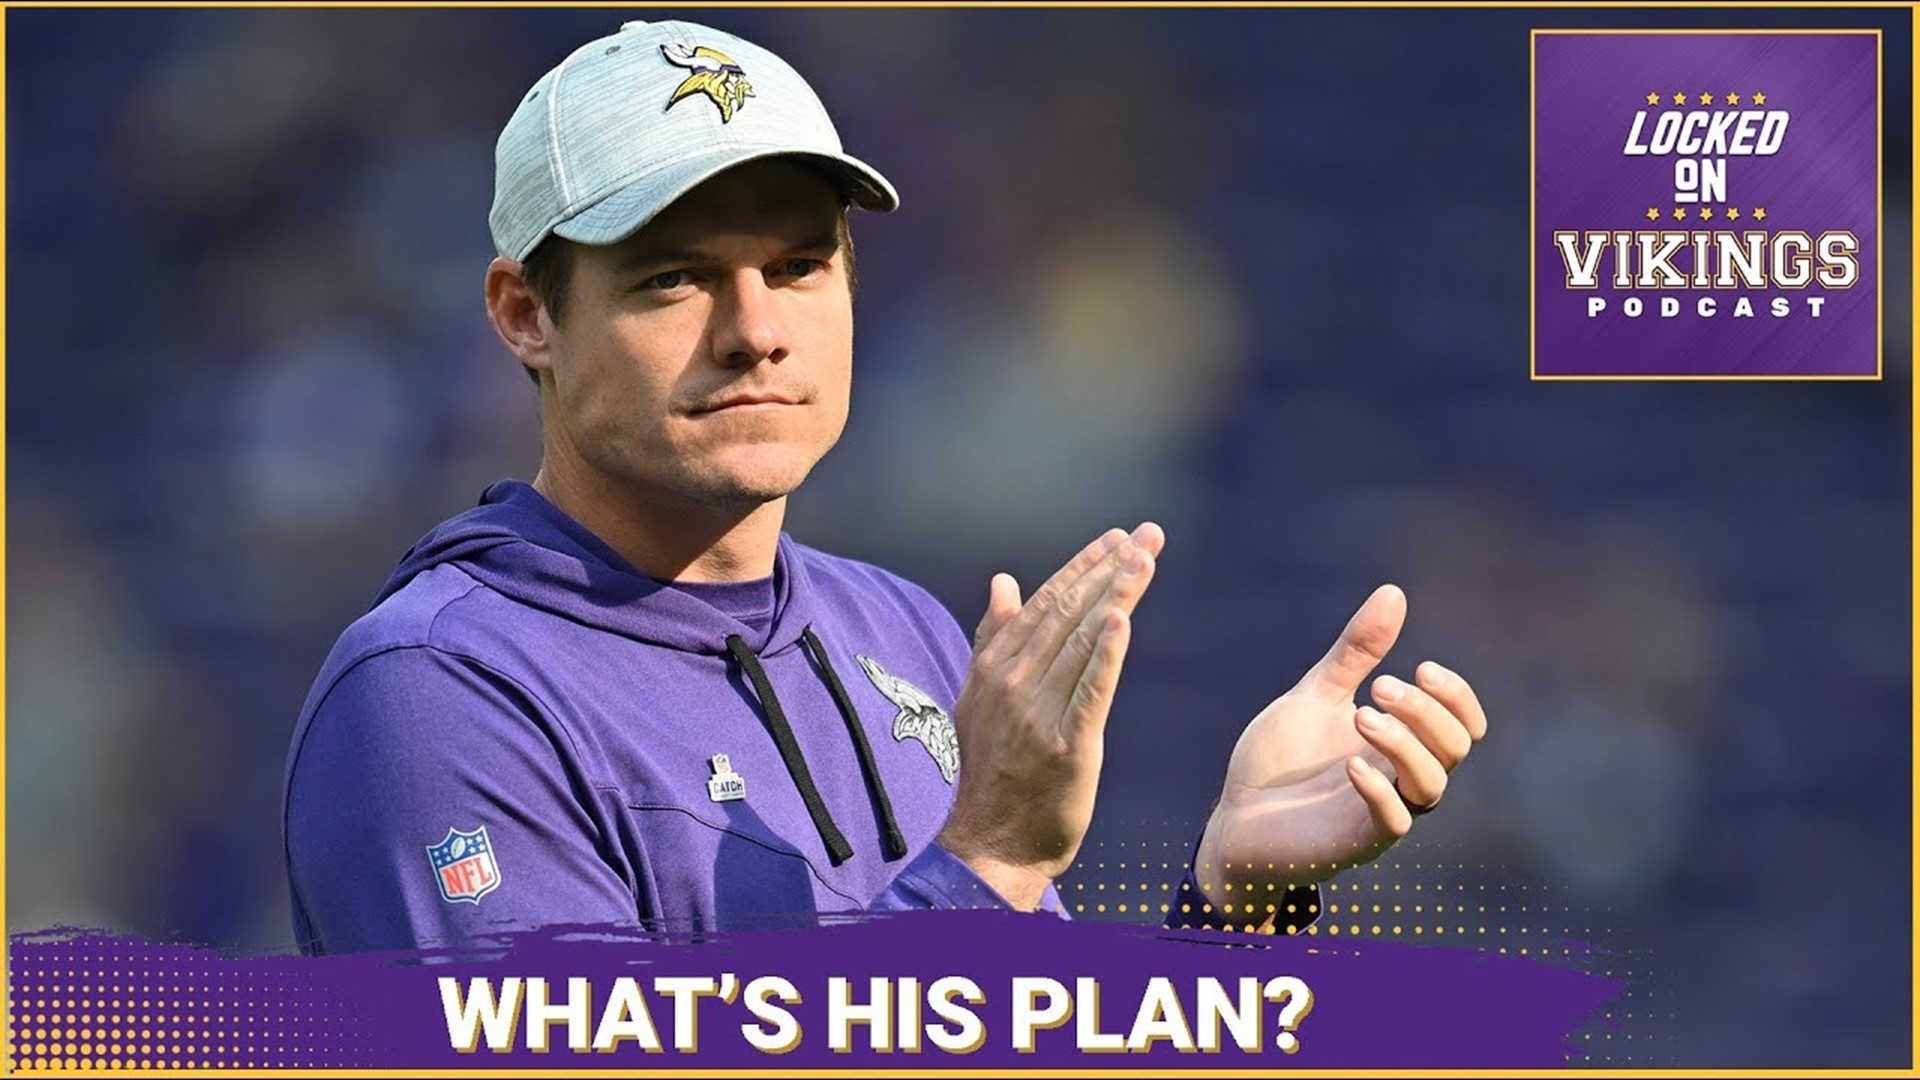 Many seem to be confused about Kwesi Adofo-Mensah's plan for the Vikings as well as Kevin O'Connell's... despite their repeated direct answers to that question.